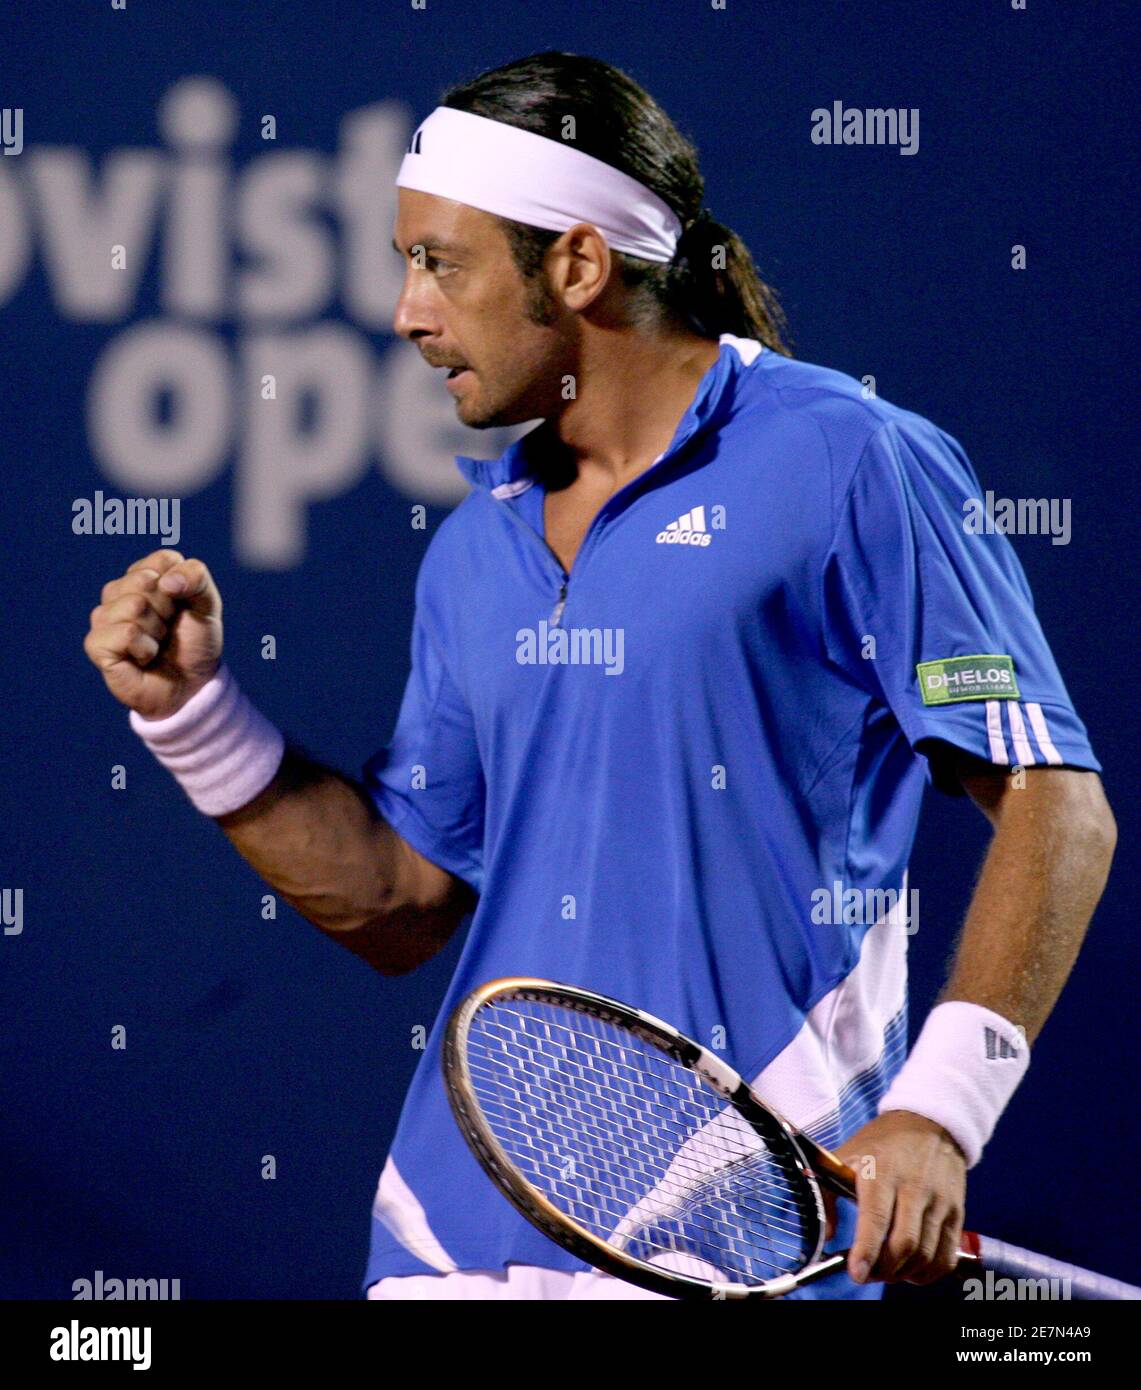 Nicolas Massu of Chile reacts during his match against Luis Horna of Peru  at the ATP tennis tournament in Vina del Mar city, 137km (85 miles)  northwest of Santiago, February 4, 2007.